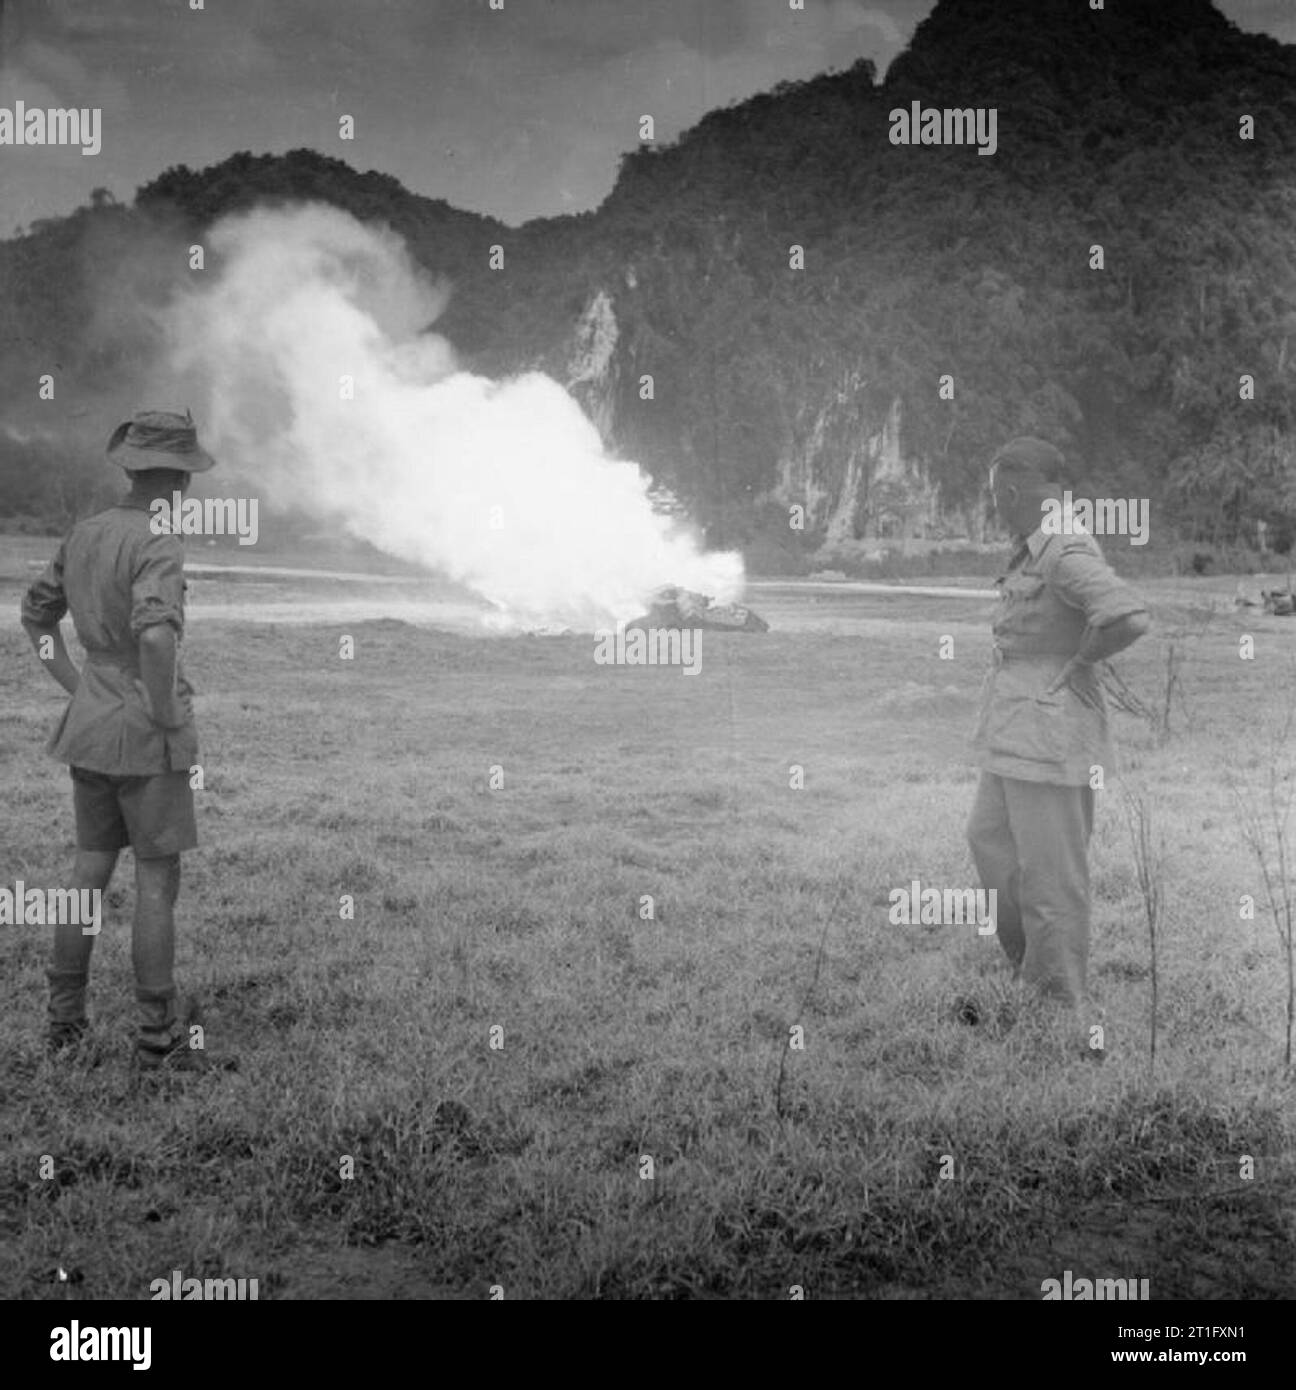 The British Reoccupation of Malaya Two British officers watch as a fierce magnesium flame leaps into the air as an incendiary bomb ignites on a fire formed by burning munitions from the former Japanese ammunition store in the limestone caves at Batu, Selangor State, near Kuala Lumpur. Stock Photo